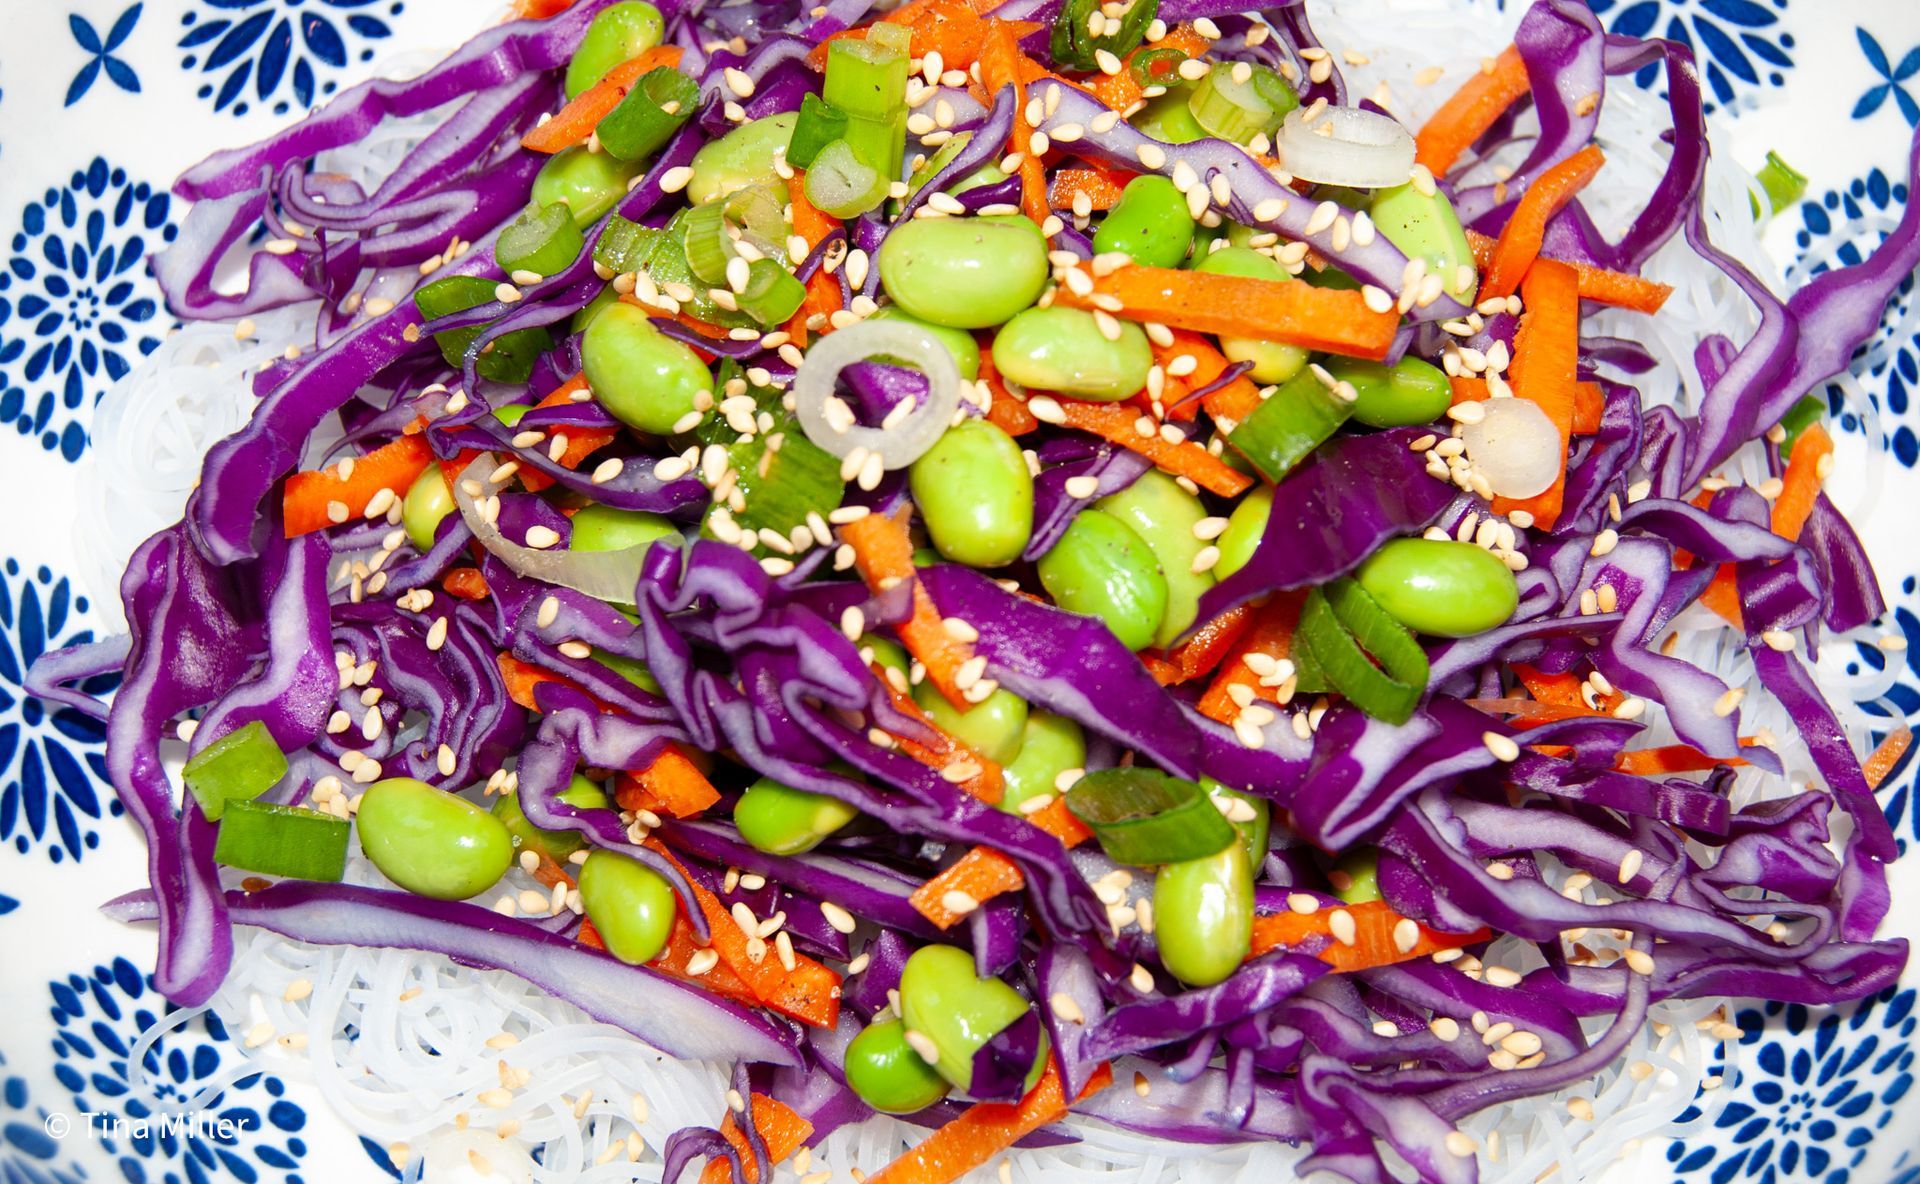 Red cabbage and edamame slaw with carrots in a bowl over rice vermicelli, garnished with sesame seeds and miso dressing.